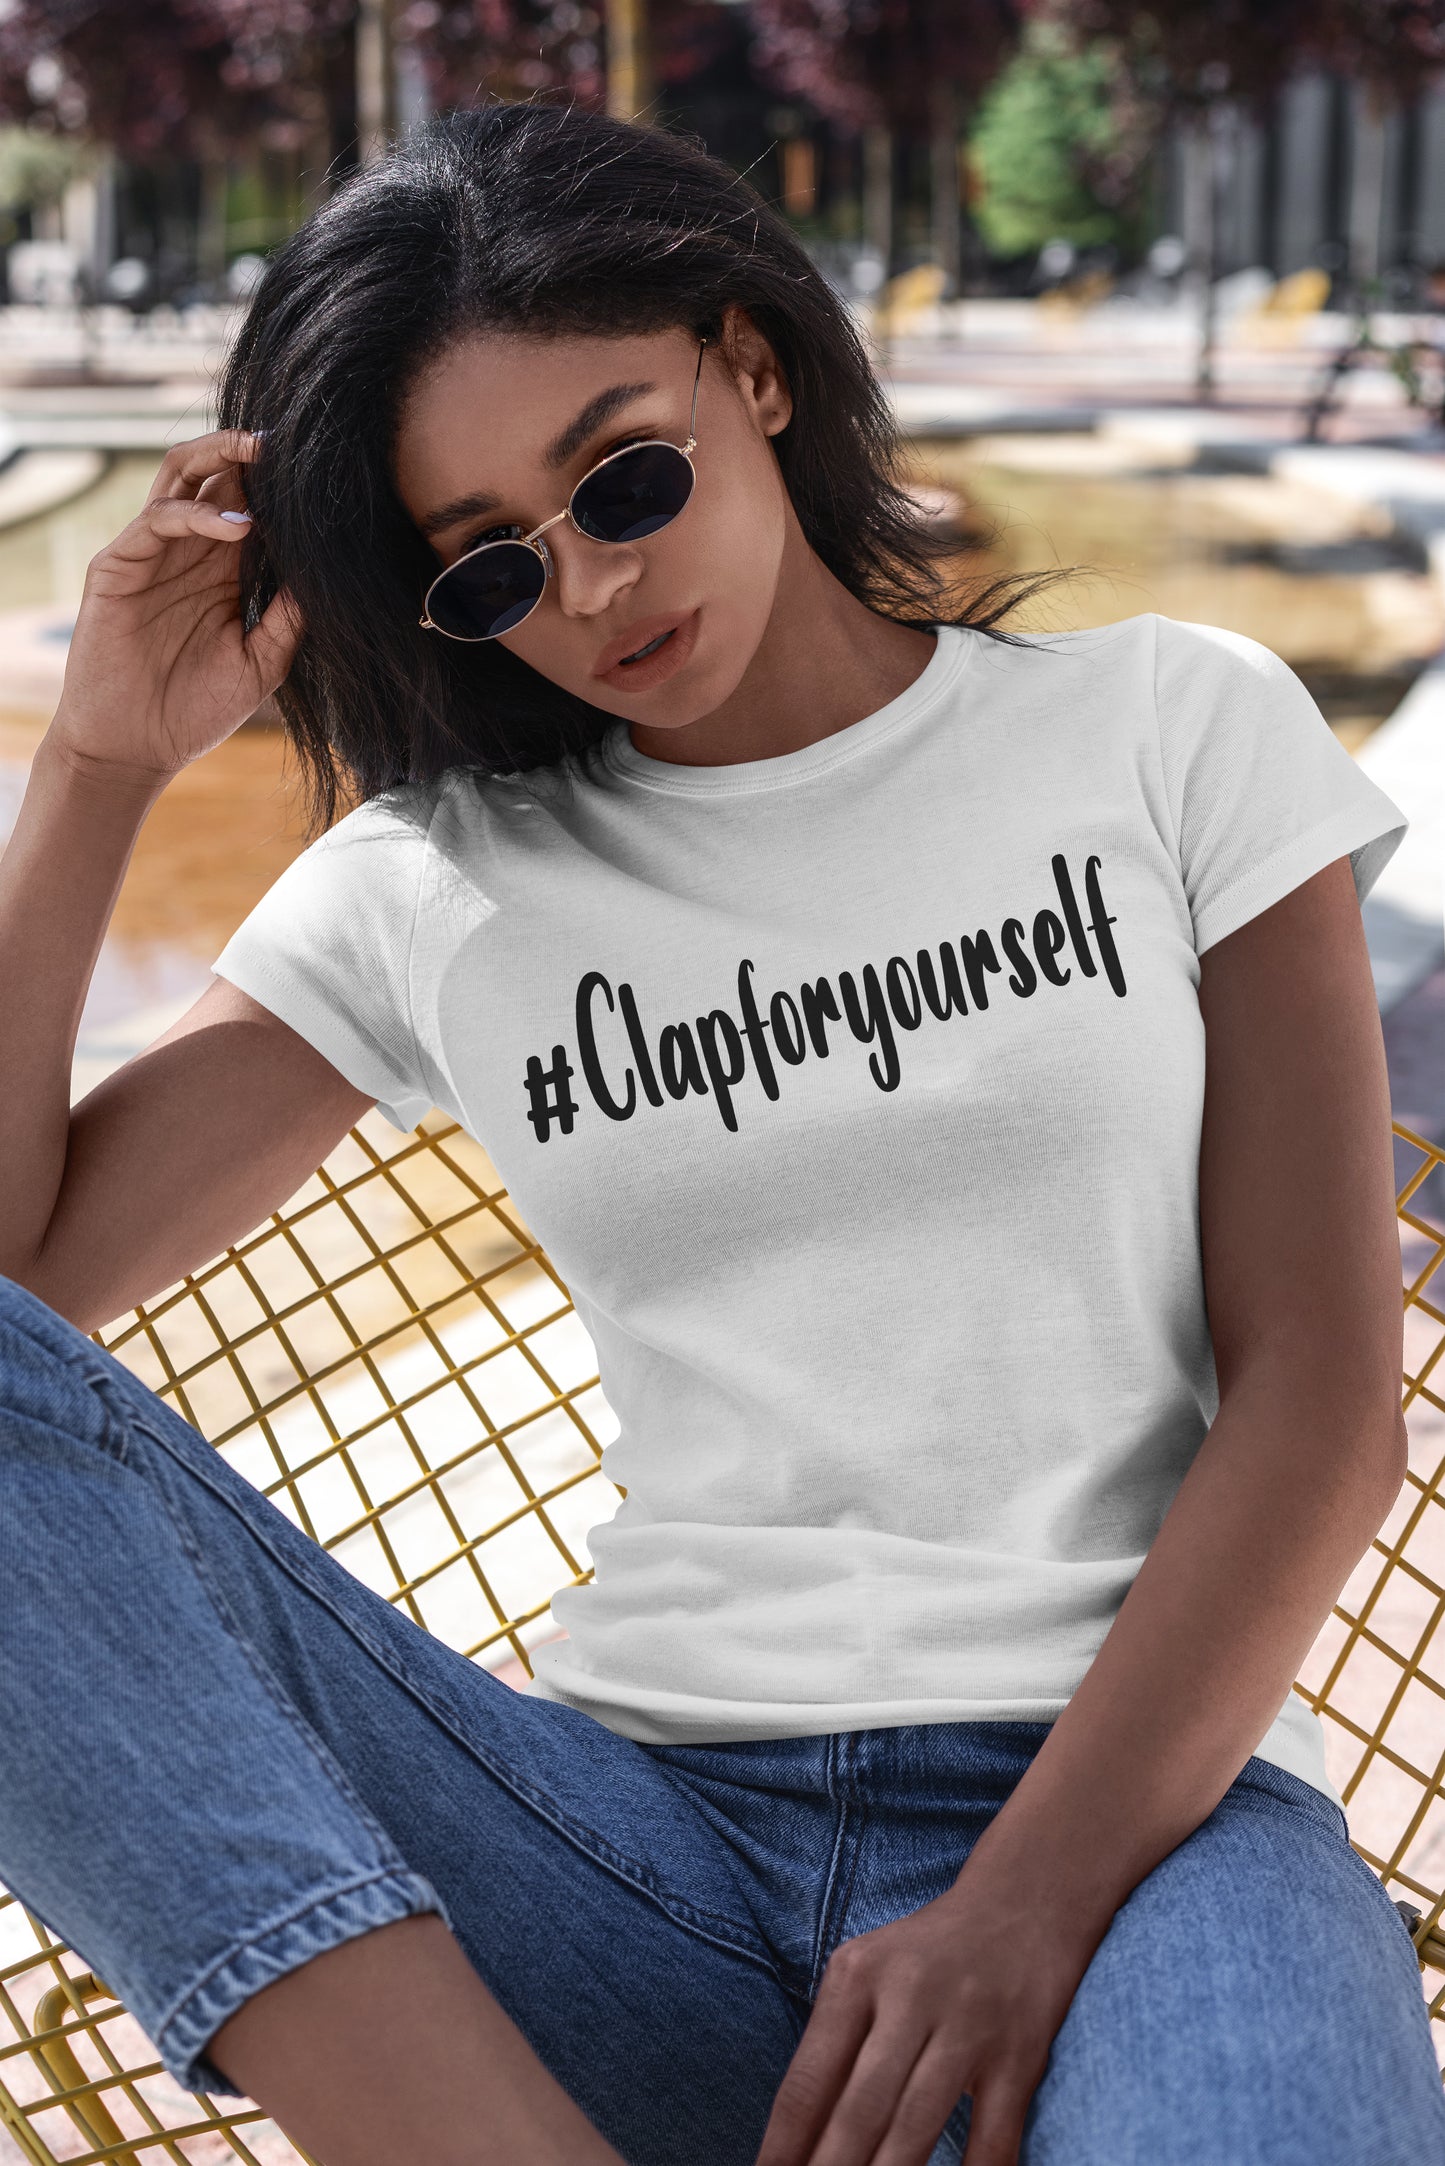 Clap For Yourself T-Shirt